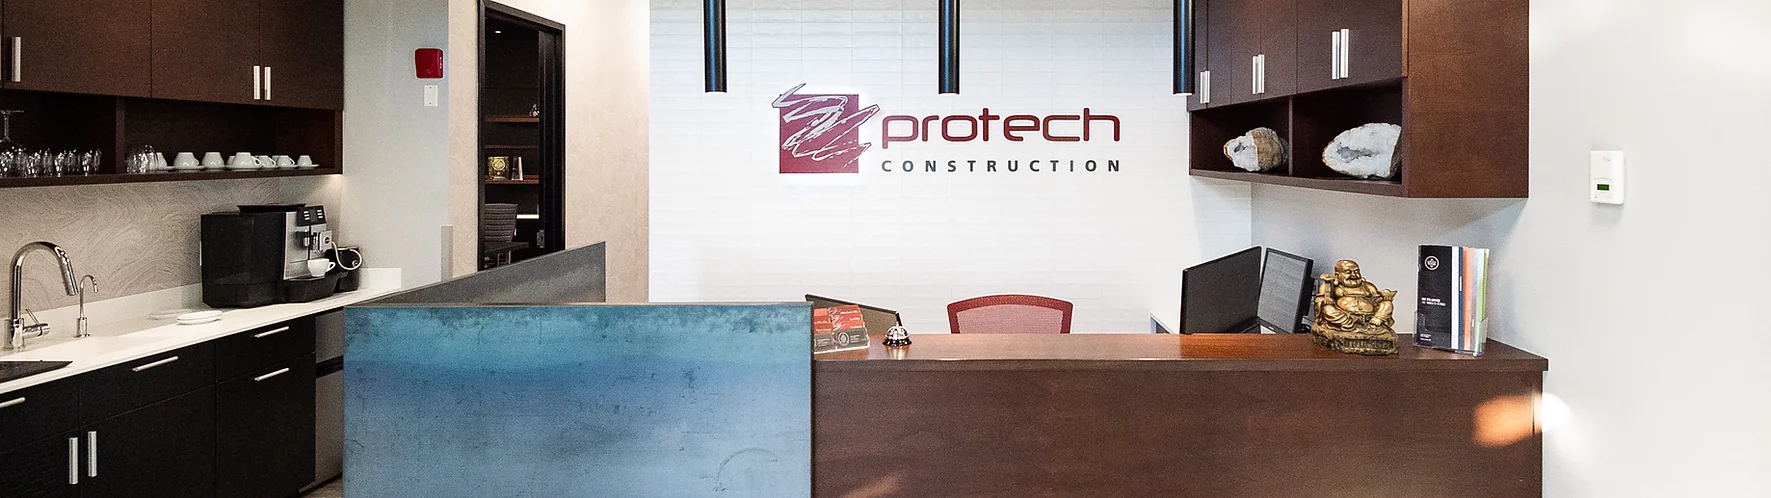 Inside look at Protech Construction's head office post-transformation by our general contractor.